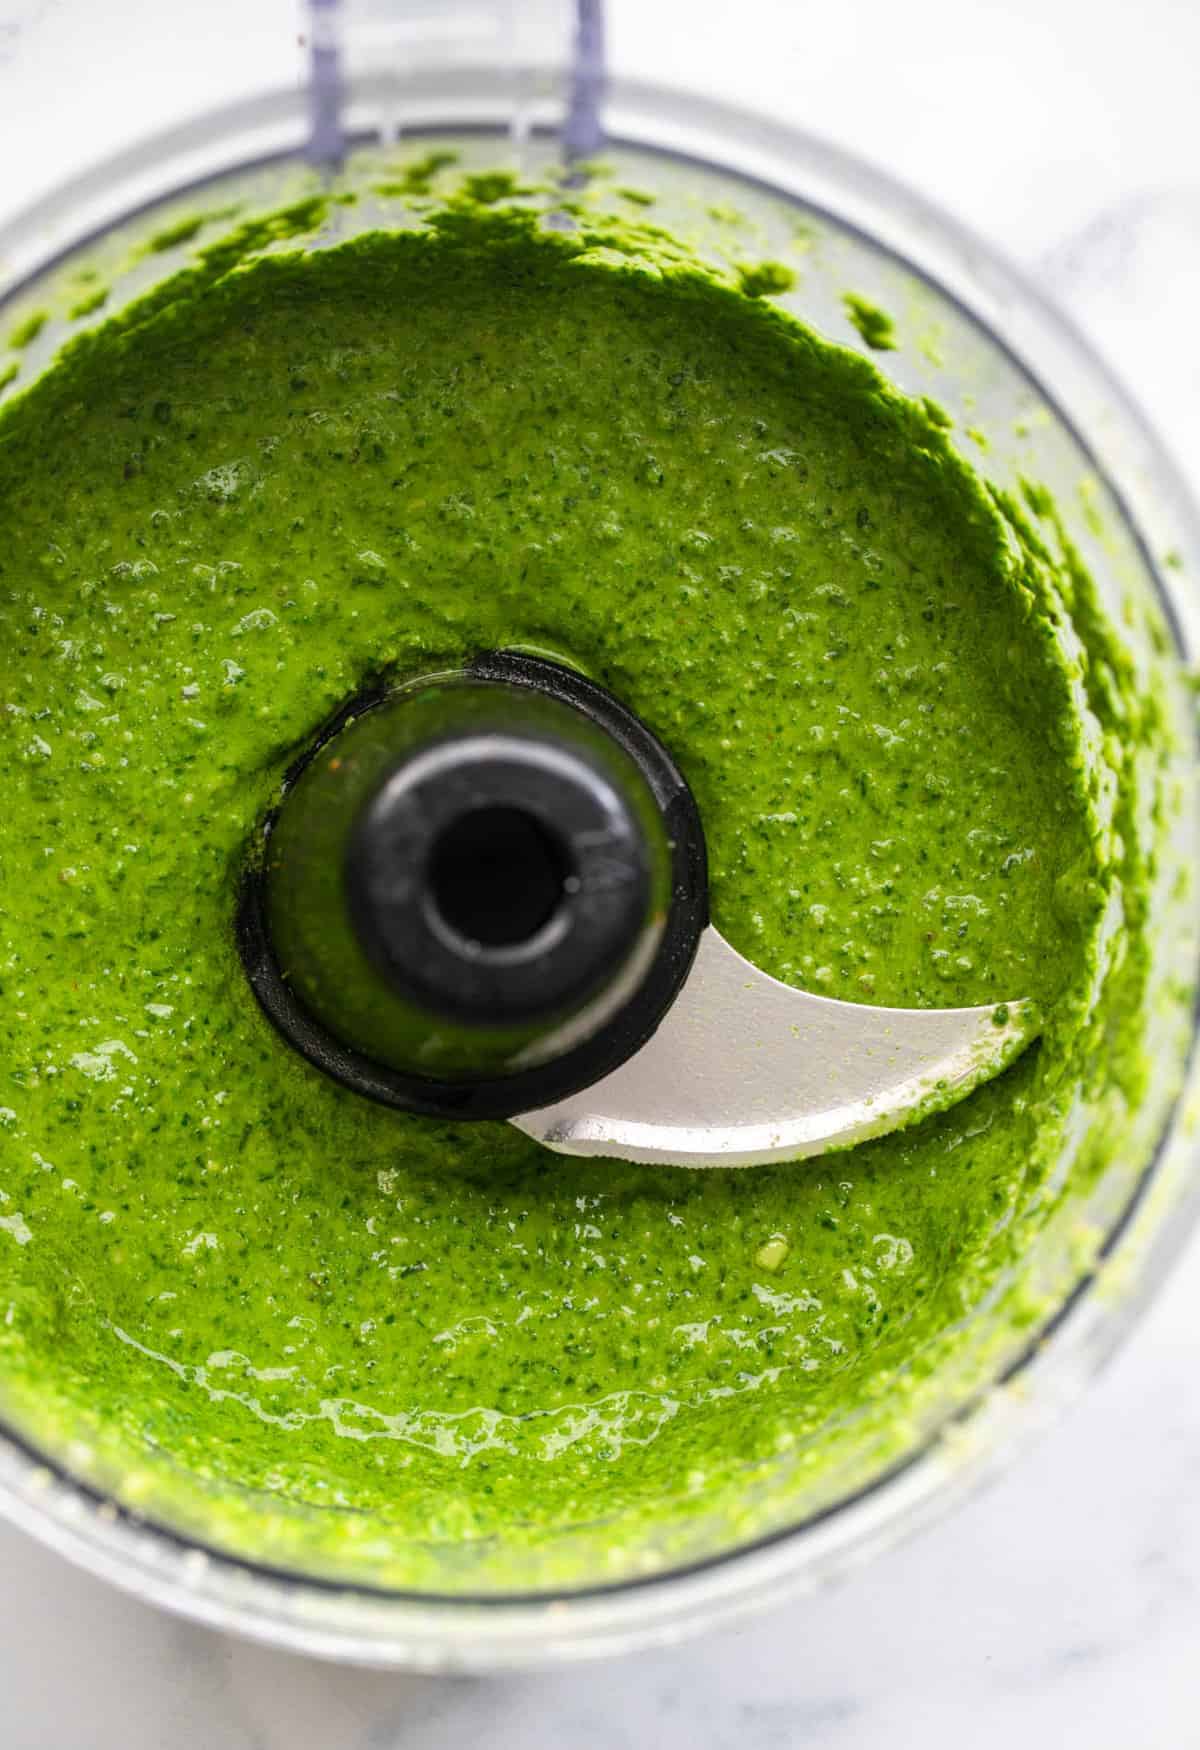 Spinach basil pesto in a food processor after being blended